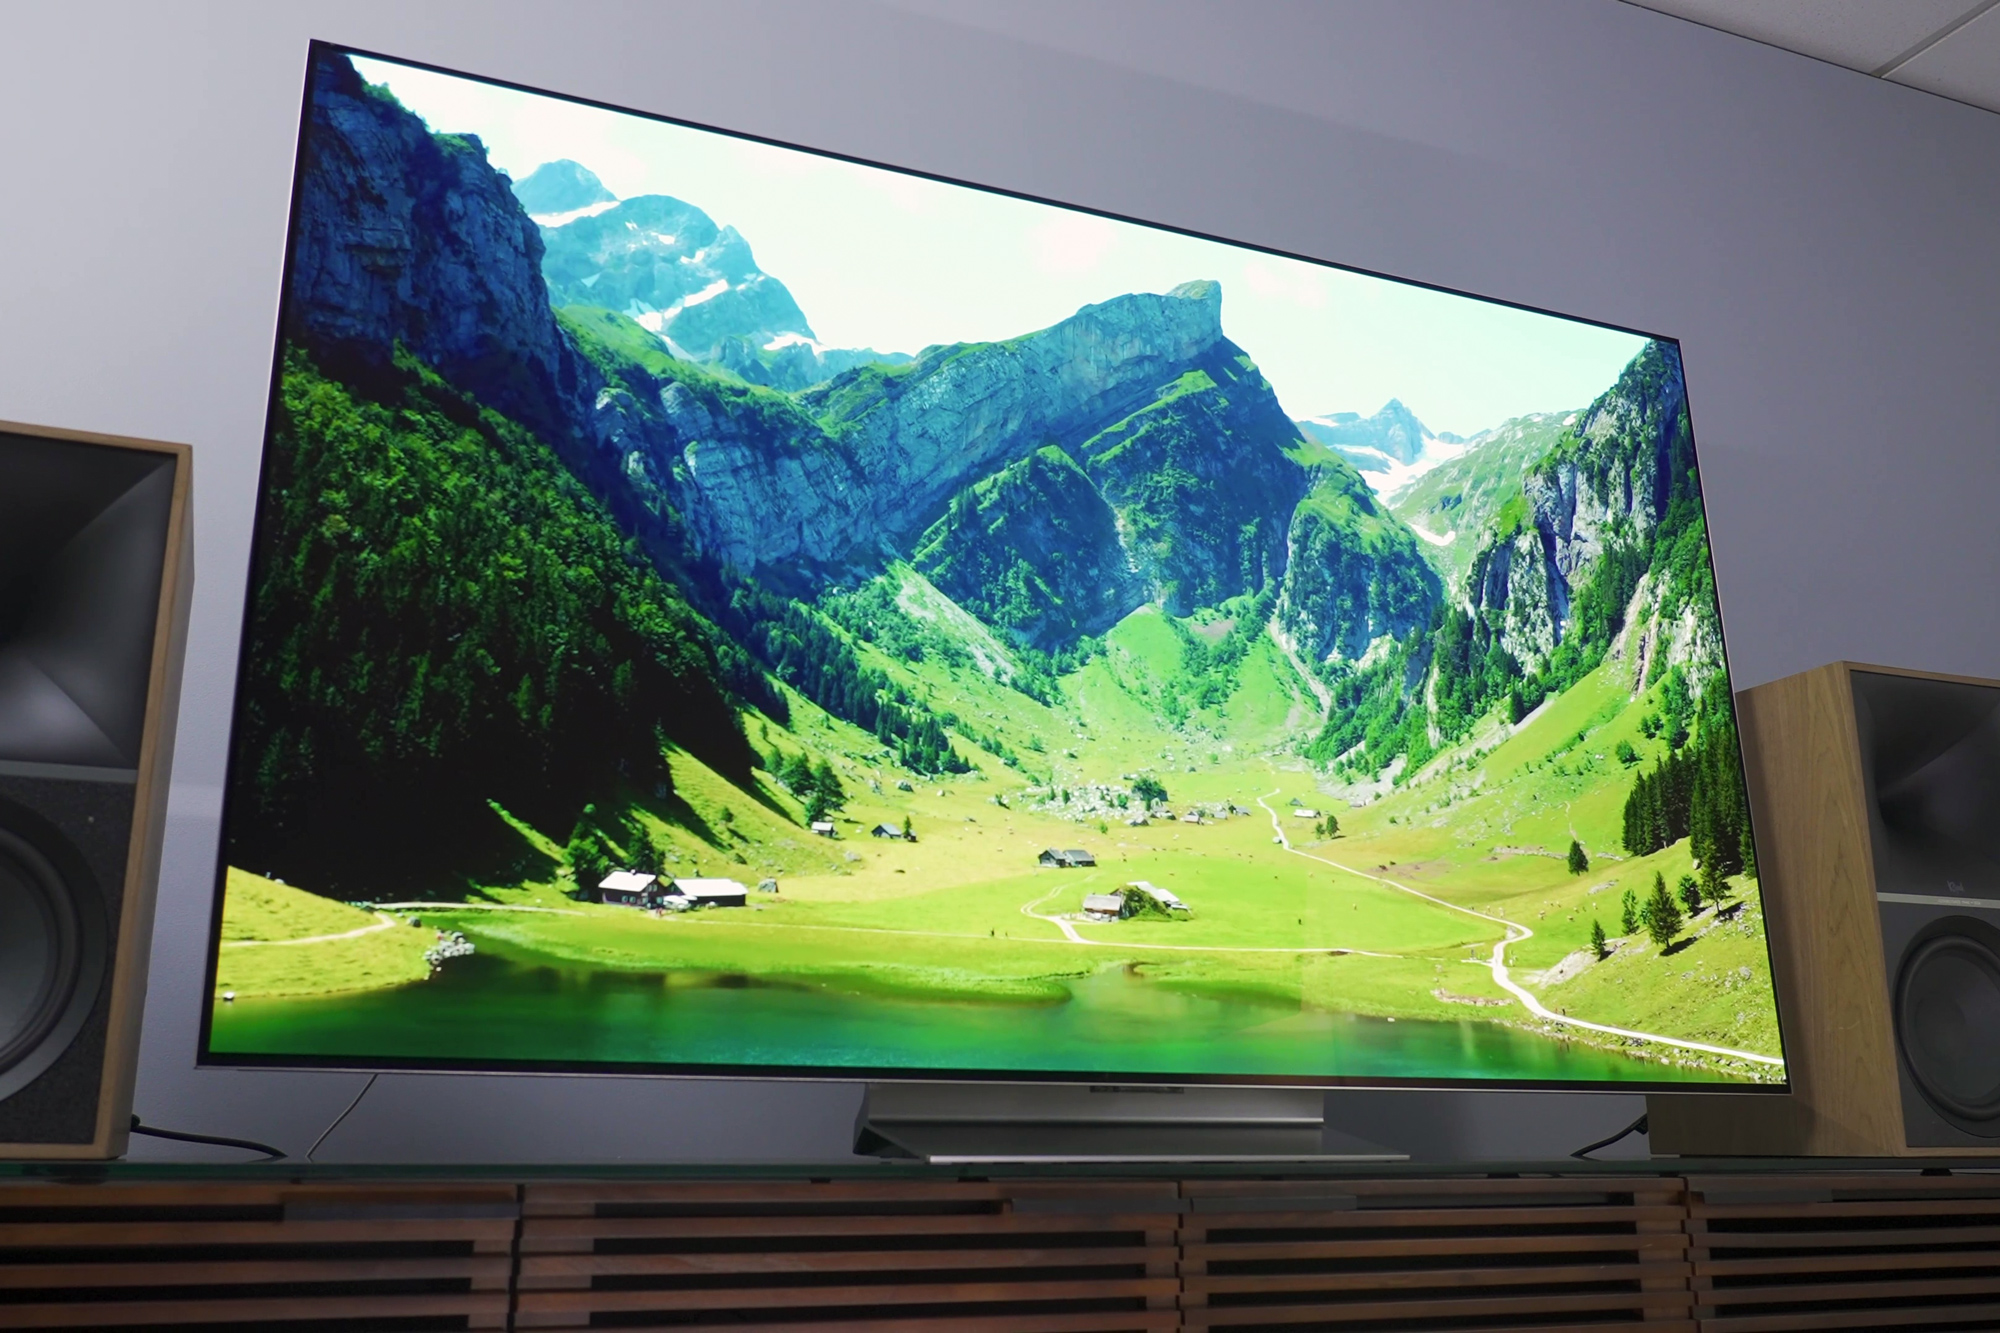 LG G3 OLED TV review: OLED's future looks bright